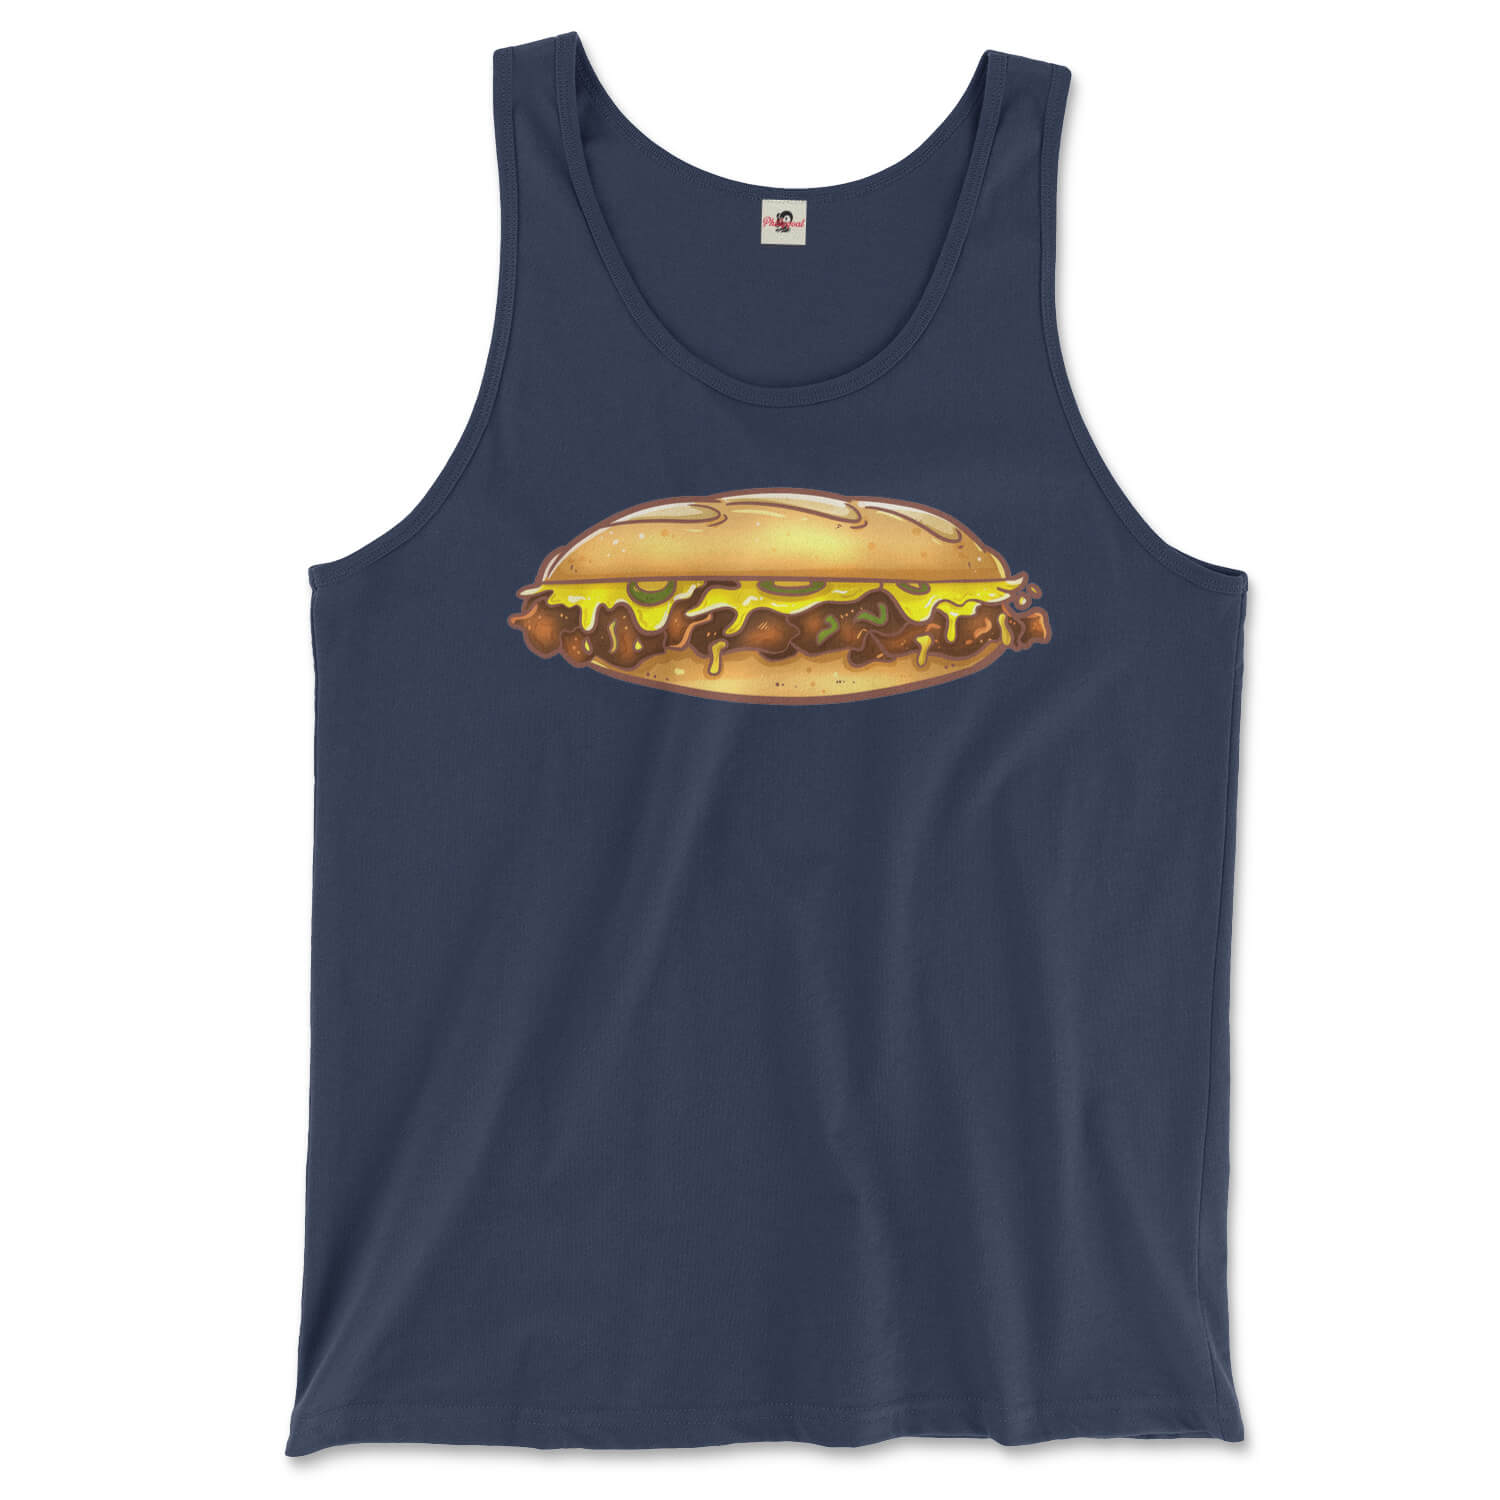 Philadelphia Philly cheesesteak navy blue tank top from Phillygoat